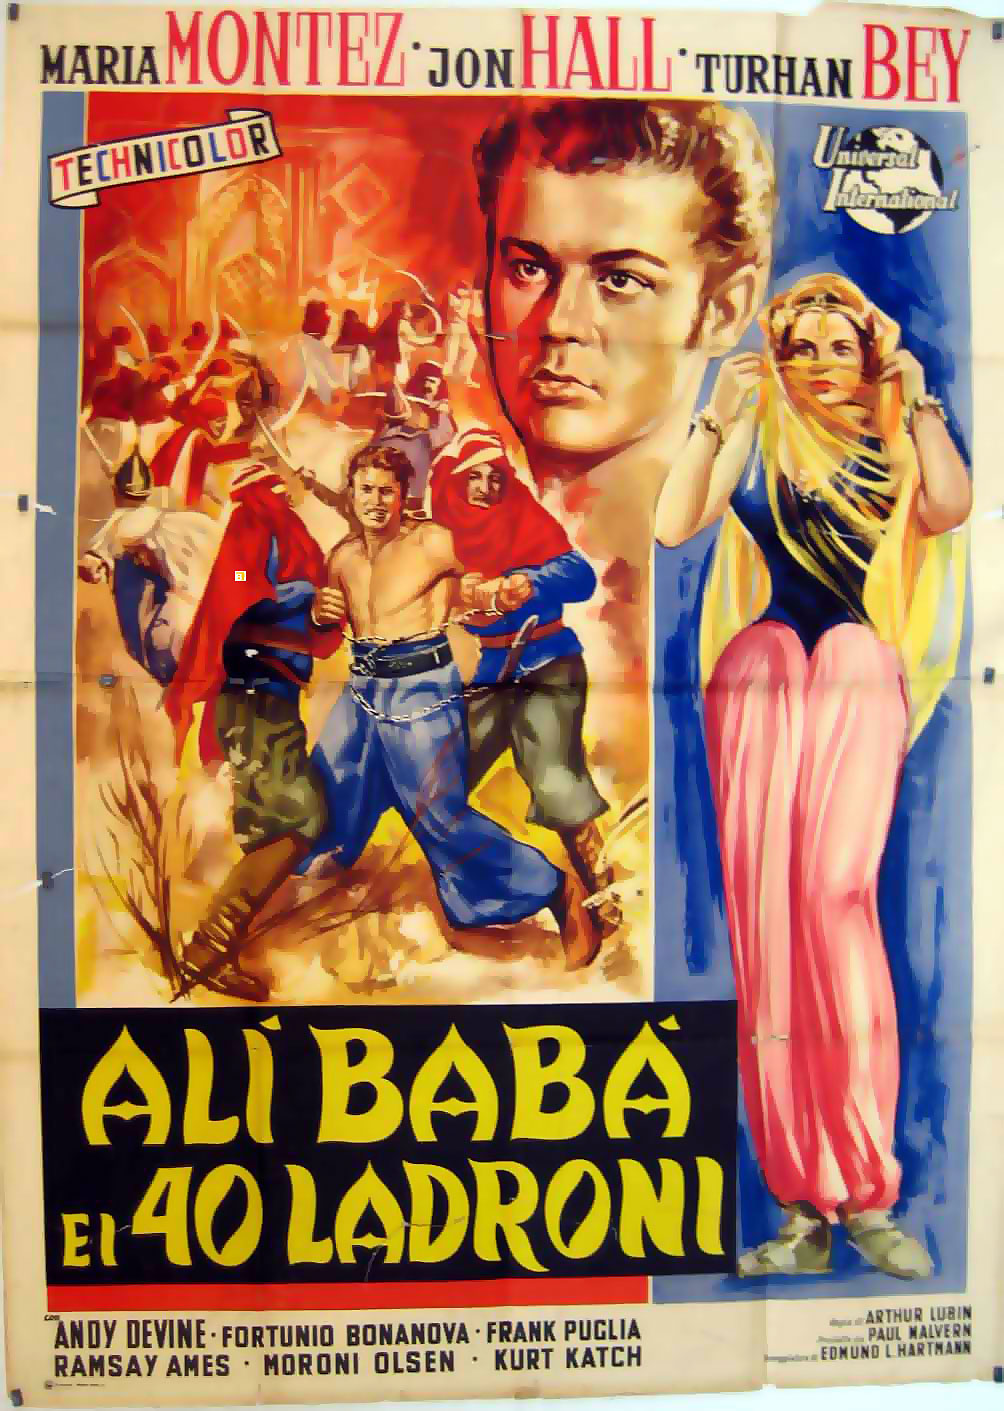 "ALI BABA ET LES 40 VOLEURS" MOVIE POSTER - "ALI BABA AND THE 40